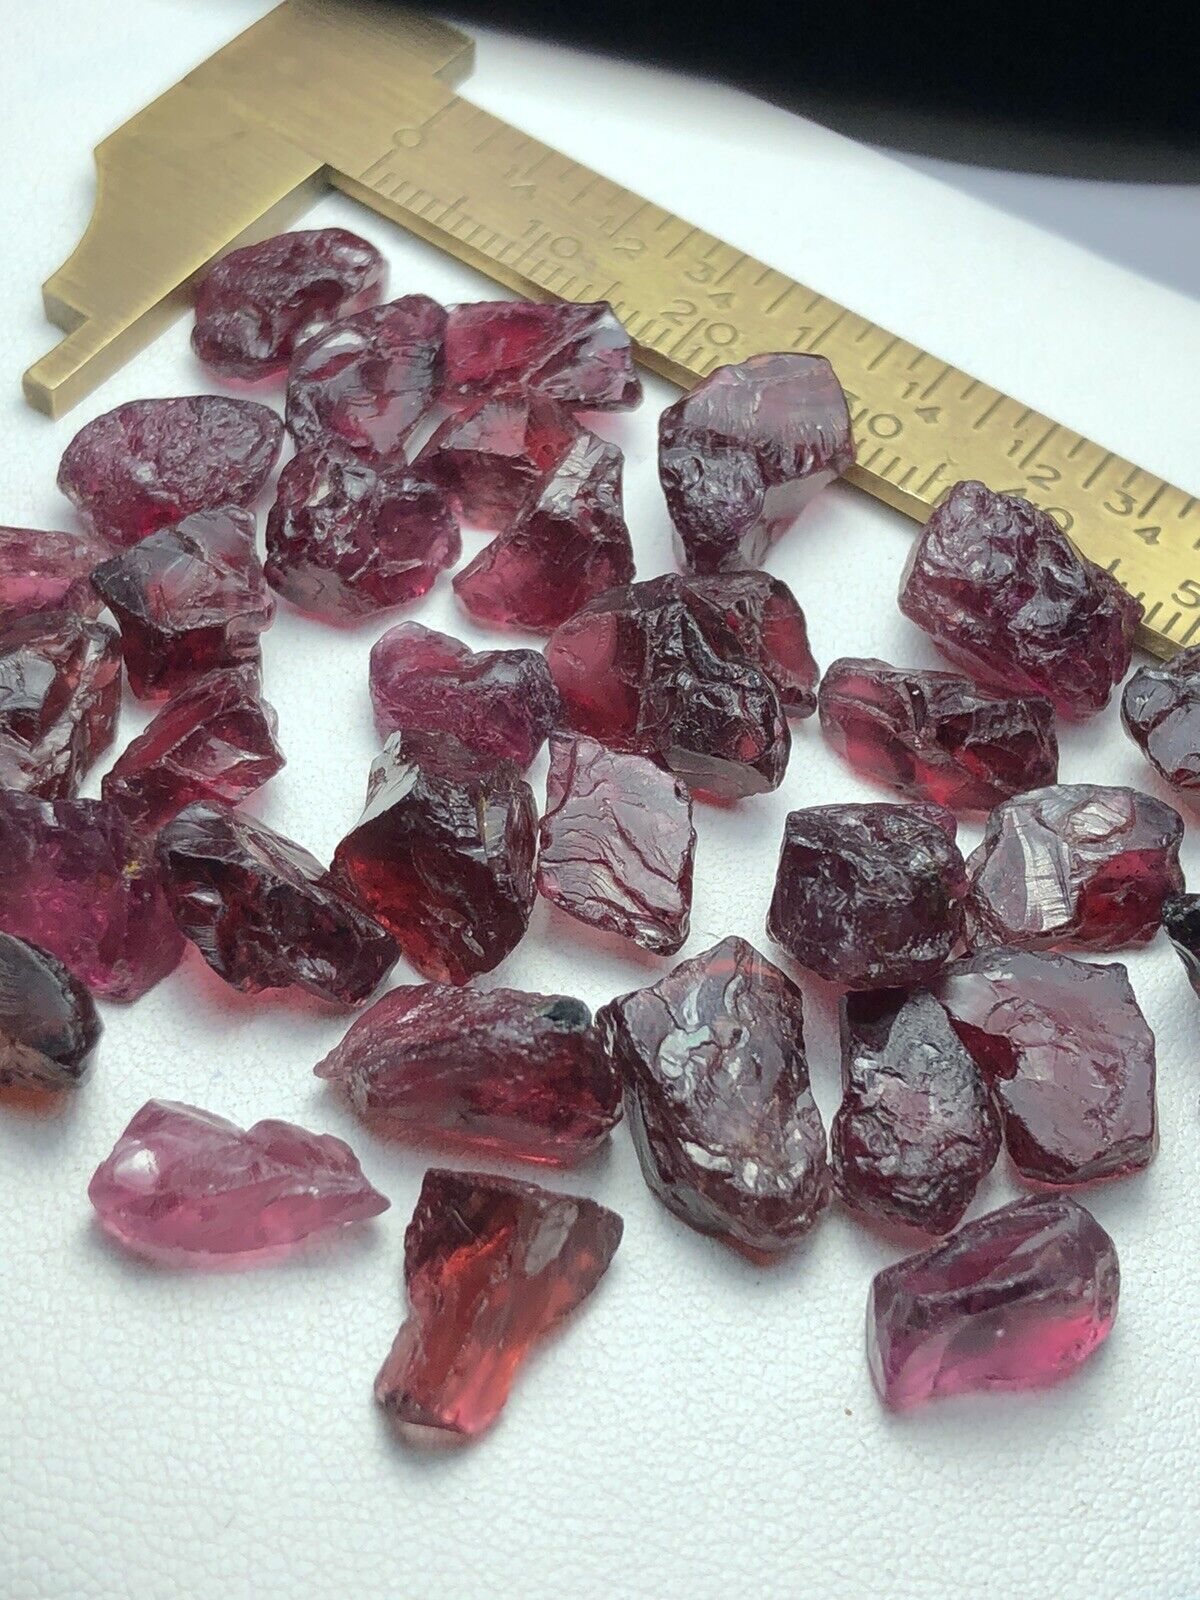 30 Grams / 34 Piece / Natural Rough Red Garnet From Tanzania Mine, Open Quality